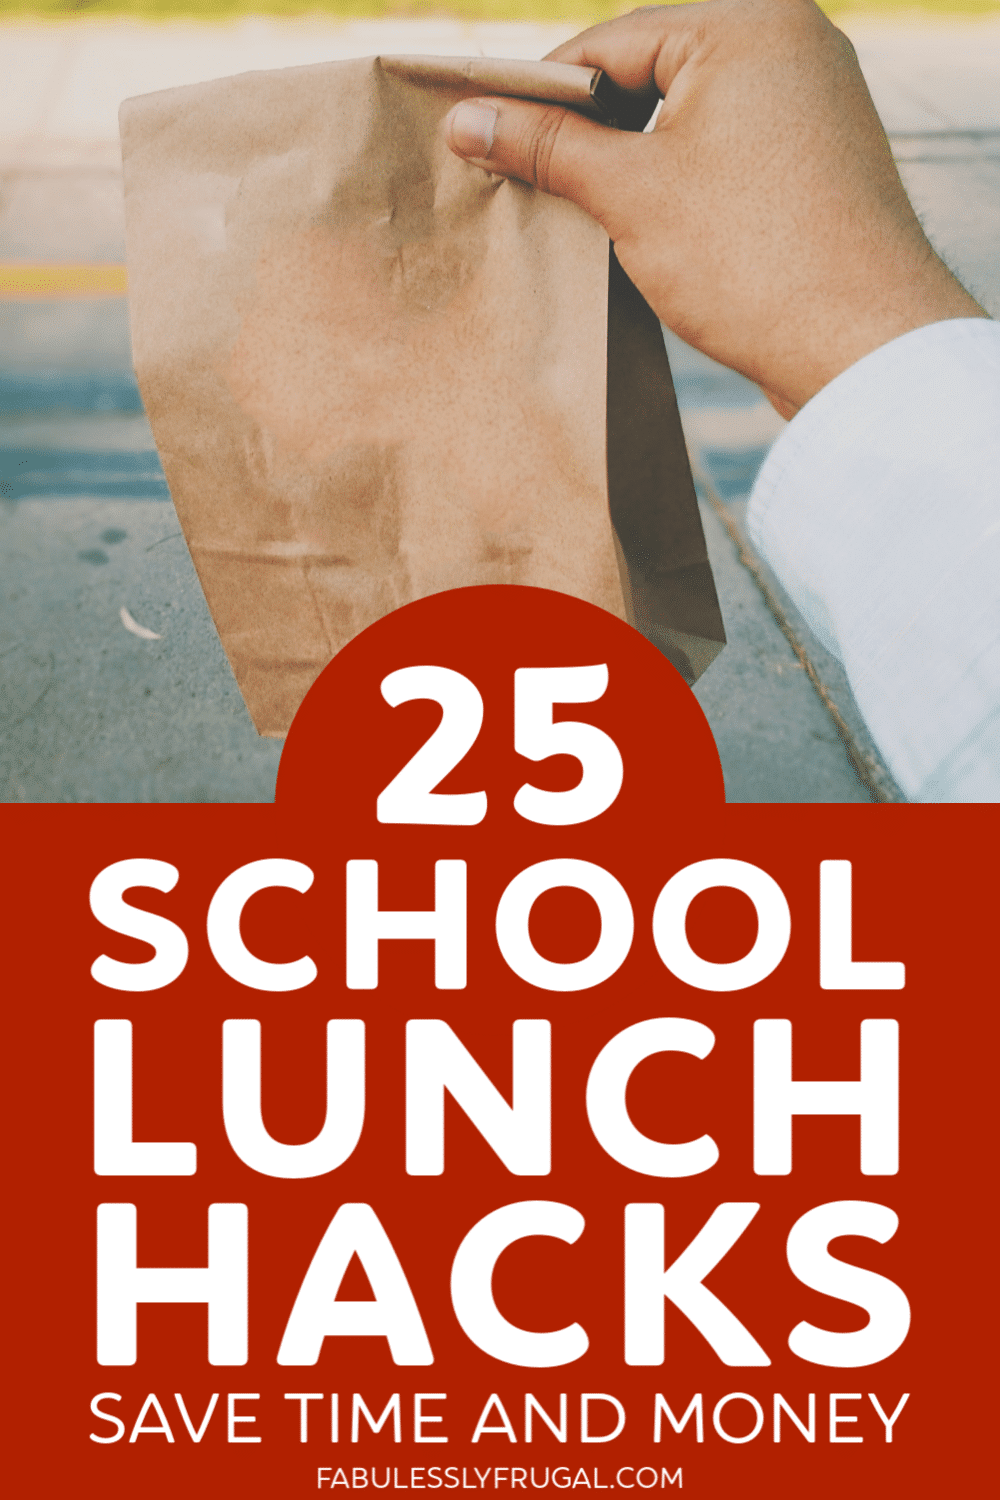 School lunch hacks to save time and money